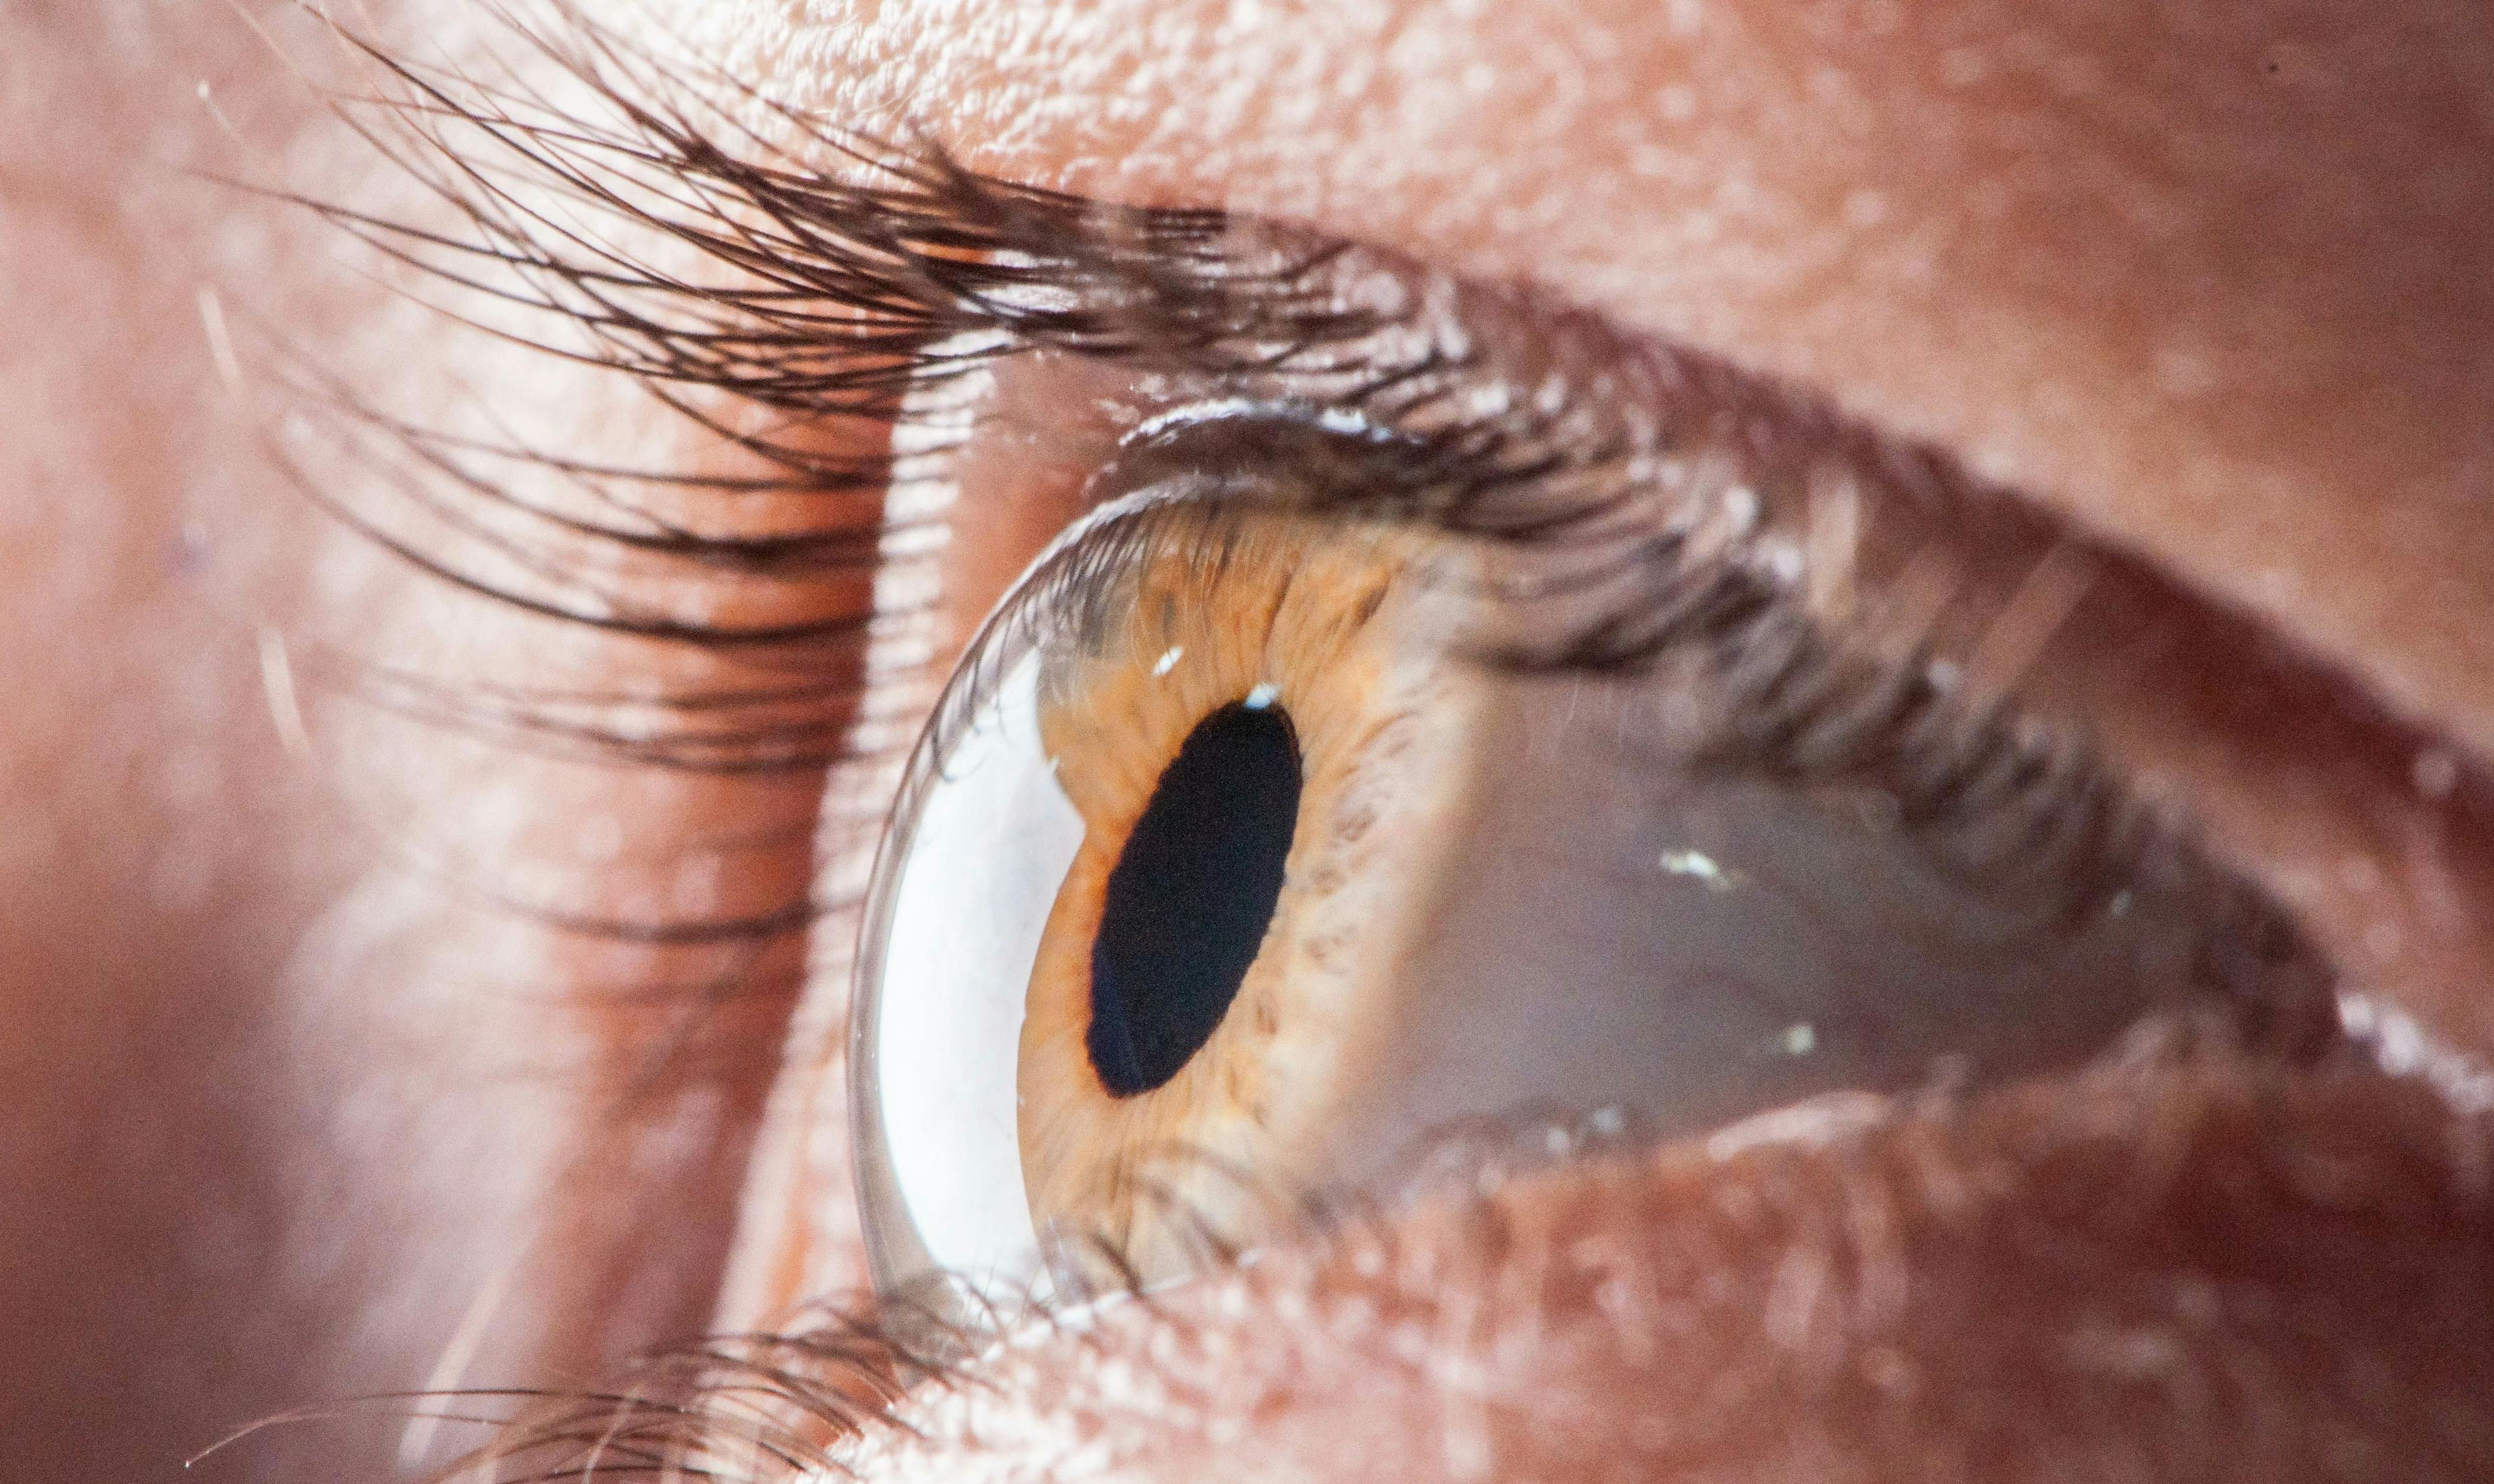 IND Cleared for Leber Hereditary Optic Neuropathy Gene Therapy